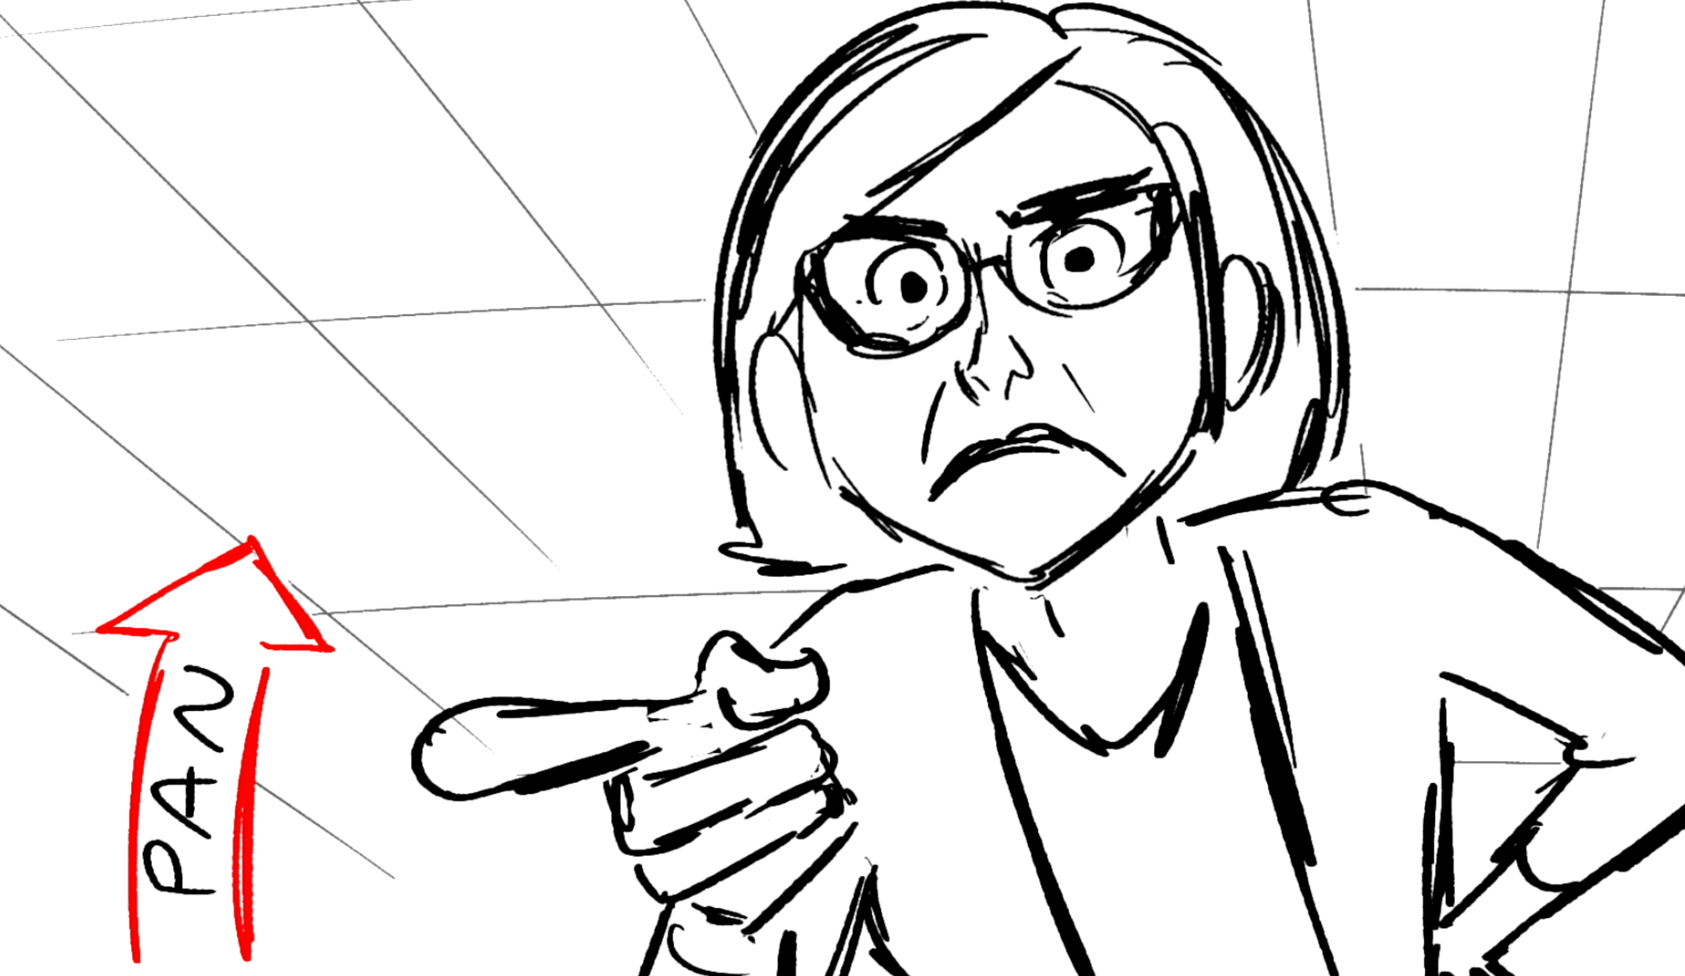 Example of a storyboard image showing a panning shot of a teacher.